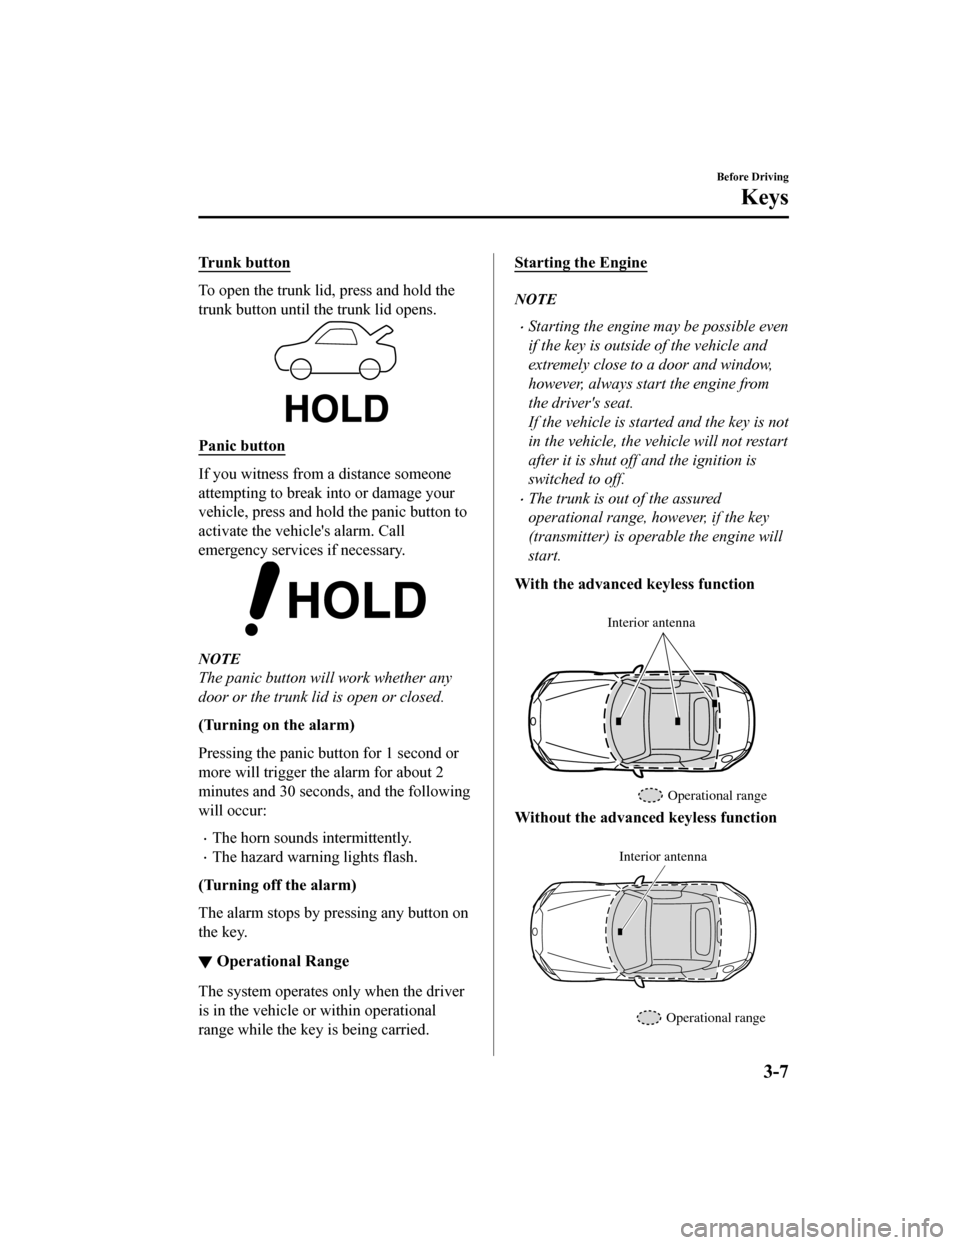 MAZDA MODEL MX-5 2018  Owners Manual (in English) Trunk button
To open the trunk lid, press and hold the
trunk button until the trunk lid opens.
Panic button
If you witness from a distance someone
attempting to break into or damage your
vehicle, pres